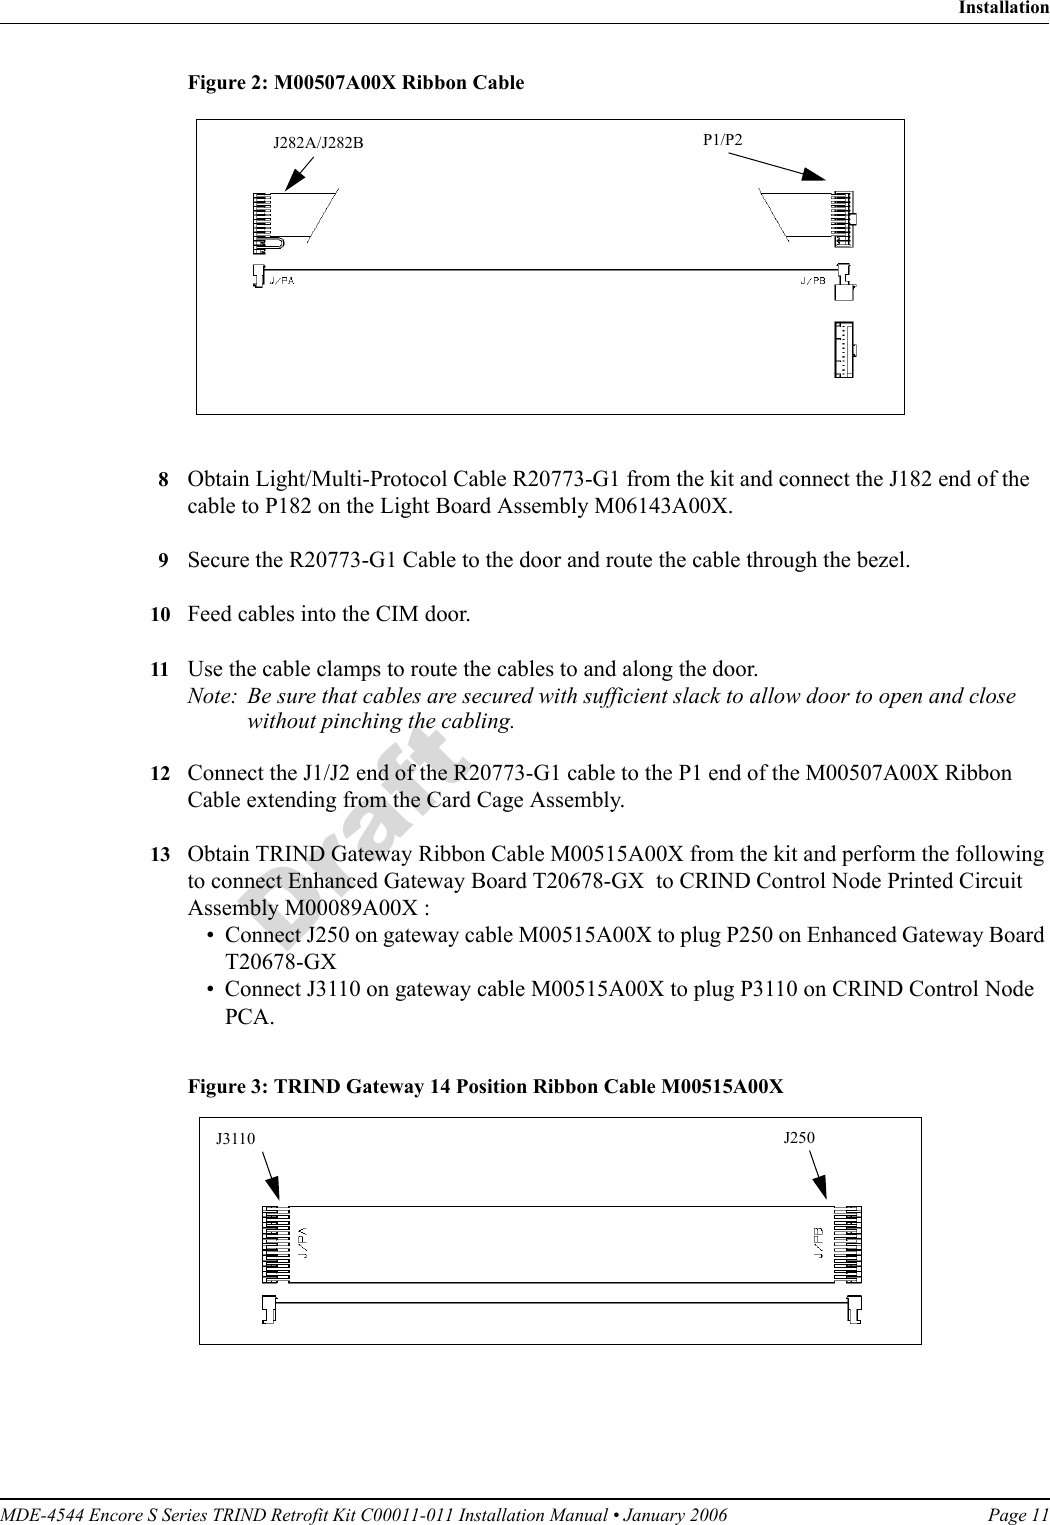 MDE-4544 Encore S Series TRIND Retrofit Kit C00011-011 Installation Manual • January 2006 Page 11InstallationDraftFigure 2: M00507A00X Ribbon CableJ282A/J282B P1/P28Obtain Light/Multi-Protocol Cable R20773-G1 from the kit and connect the J182 end of the cable to P182 on the Light Board Assembly M06143A00X.9Secure the R20773-G1 Cable to the door and route the cable through the bezel.10 Feed cables into the CIM door. 11 Use the cable clamps to route the cables to and along the door. Note: Be sure that cables are secured with sufficient slack to allow door to open and close without pinching the cabling.12 Connect the J1/J2 end of the R20773-G1 cable to the P1 end of the M00507A00X Ribbon Cable extending from the Card Cage Assembly.13 Obtain TRIND Gateway Ribbon Cable M00515A00X from the kit and perform the following to connect Enhanced Gateway Board T20678-GX  to CRIND Control Node Printed Circuit Assembly M00089A00X :• Connect J250 on gateway cable M00515A00X to plug P250 on Enhanced Gateway Board T20678-GX• Connect J3110 on gateway cable M00515A00X to plug P3110 on CRIND Control Node PCA.Figure 3: TRIND Gateway 14 Position Ribbon Cable M00515A00X  J3110 J250